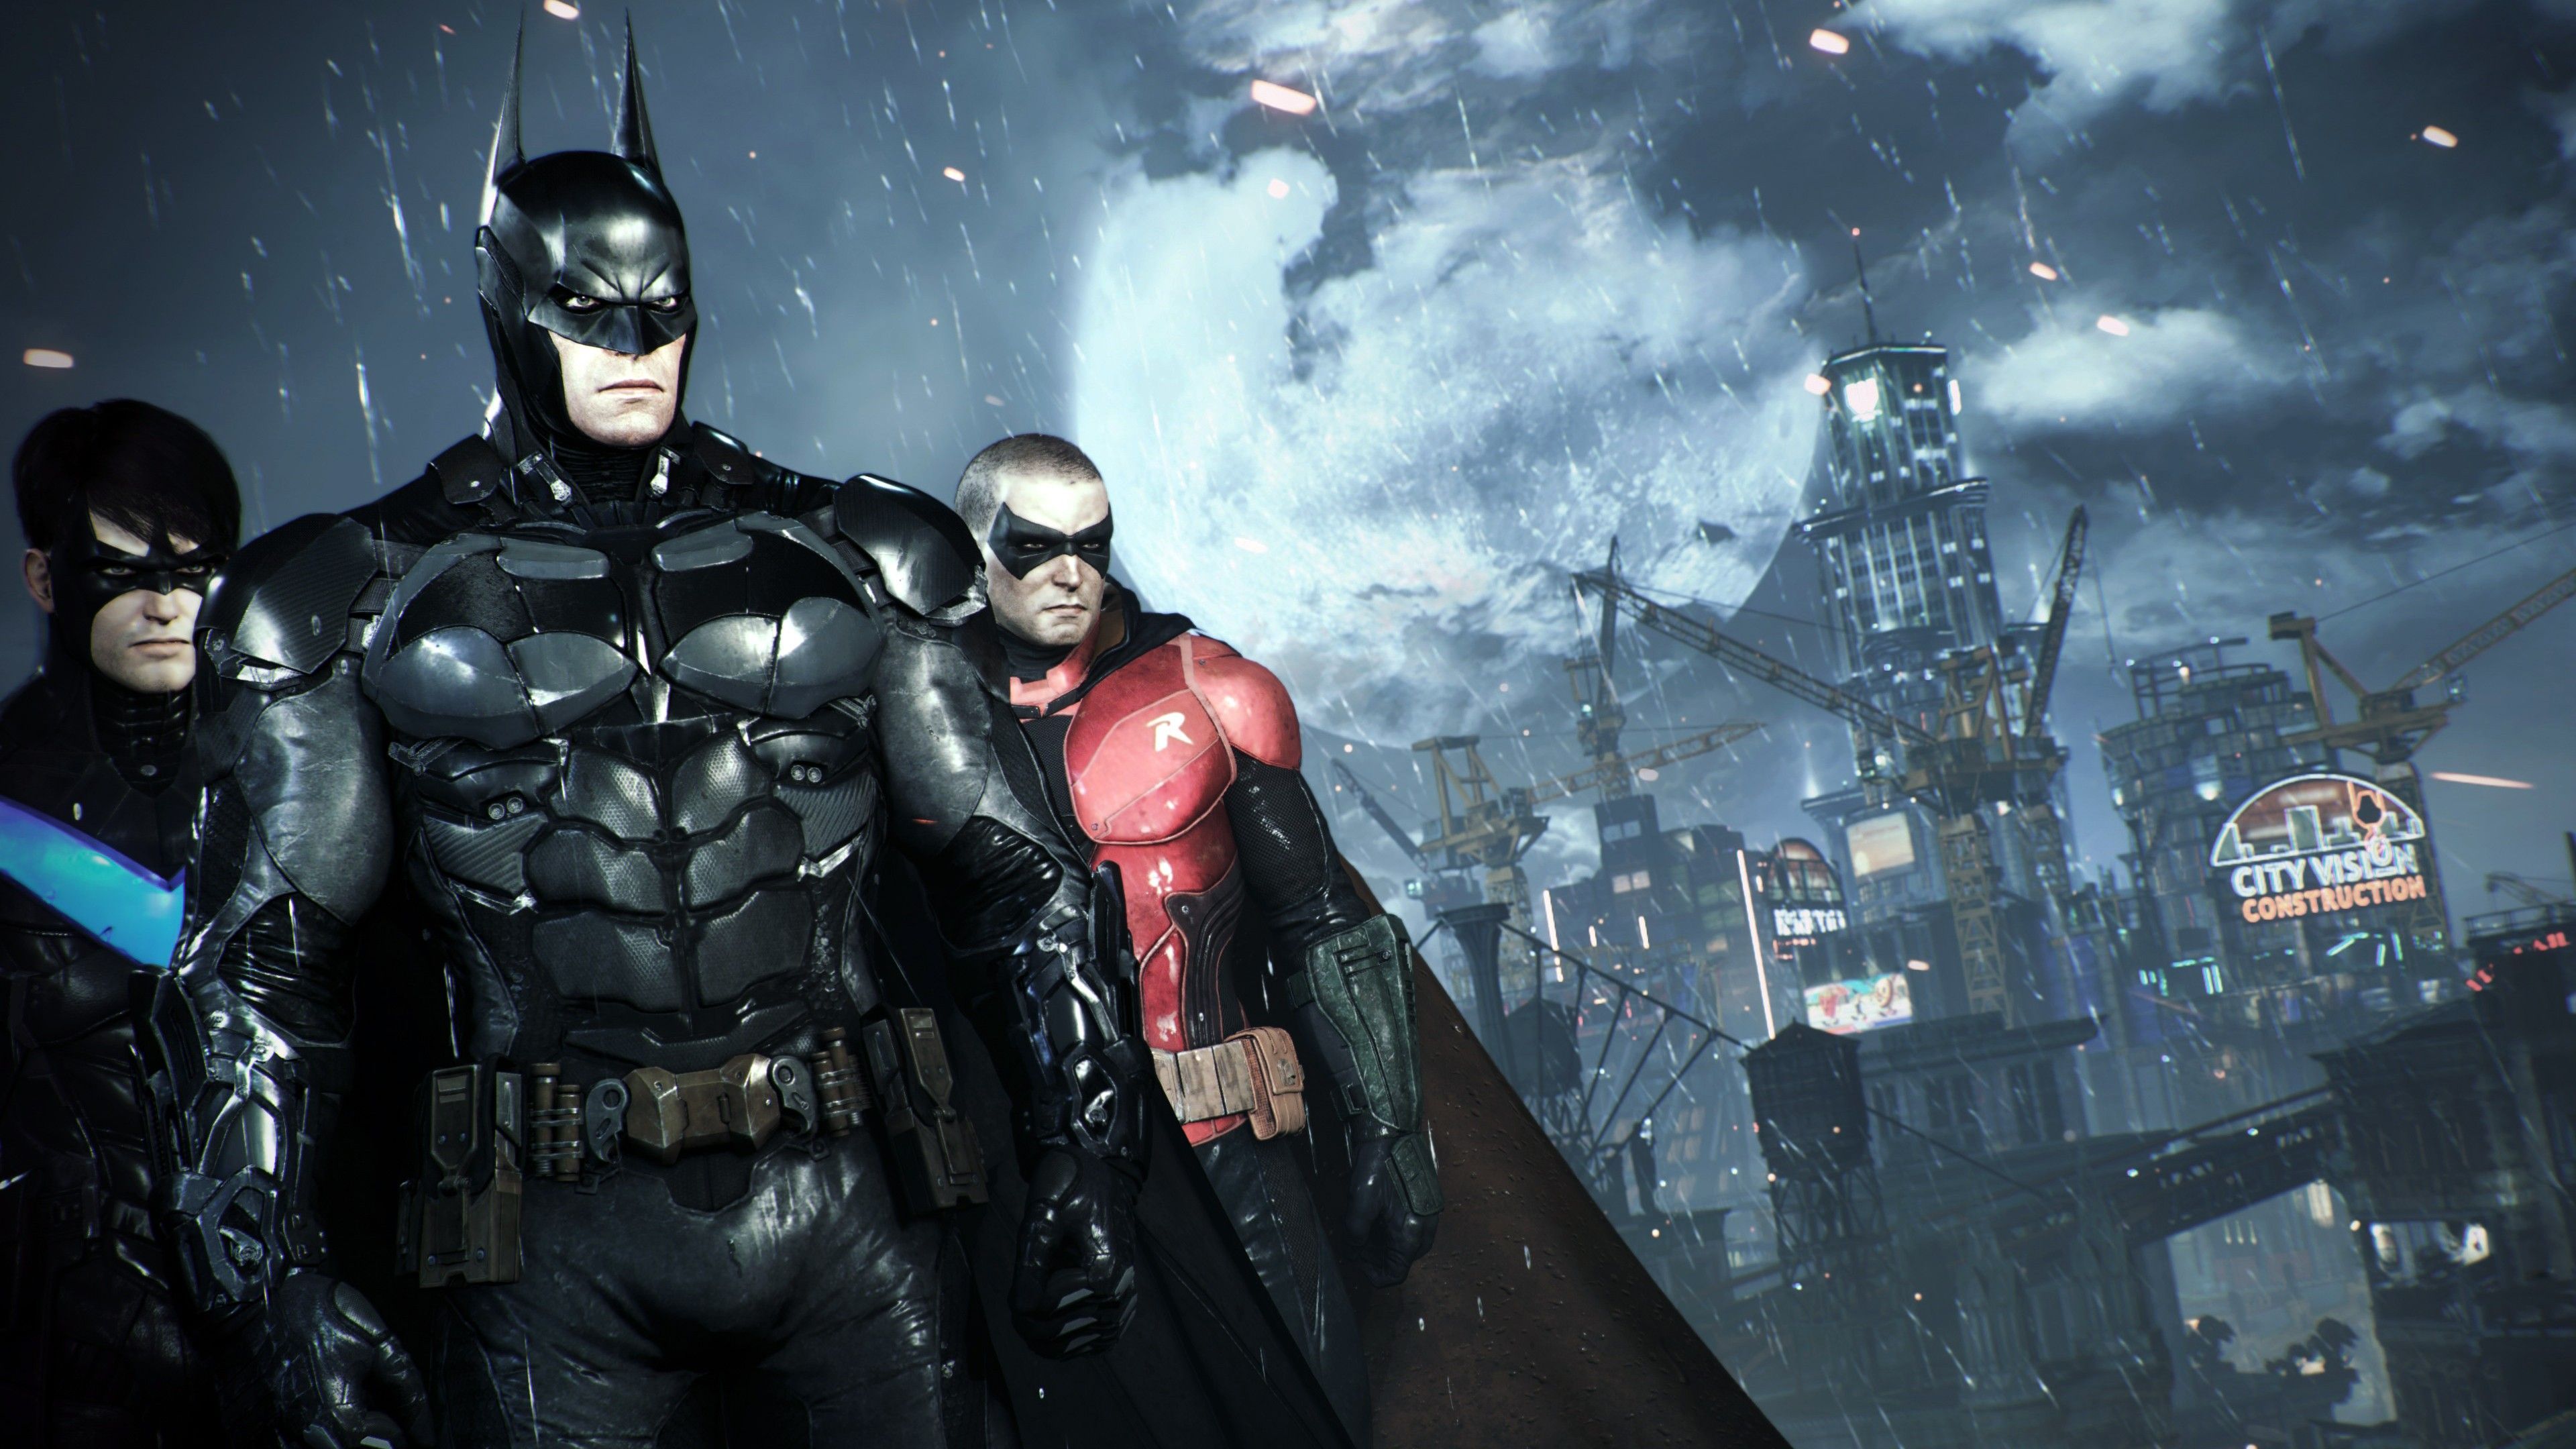 Batman Arkham Knight High Quality Wallpapers 5055 - HD Wallpapers Site